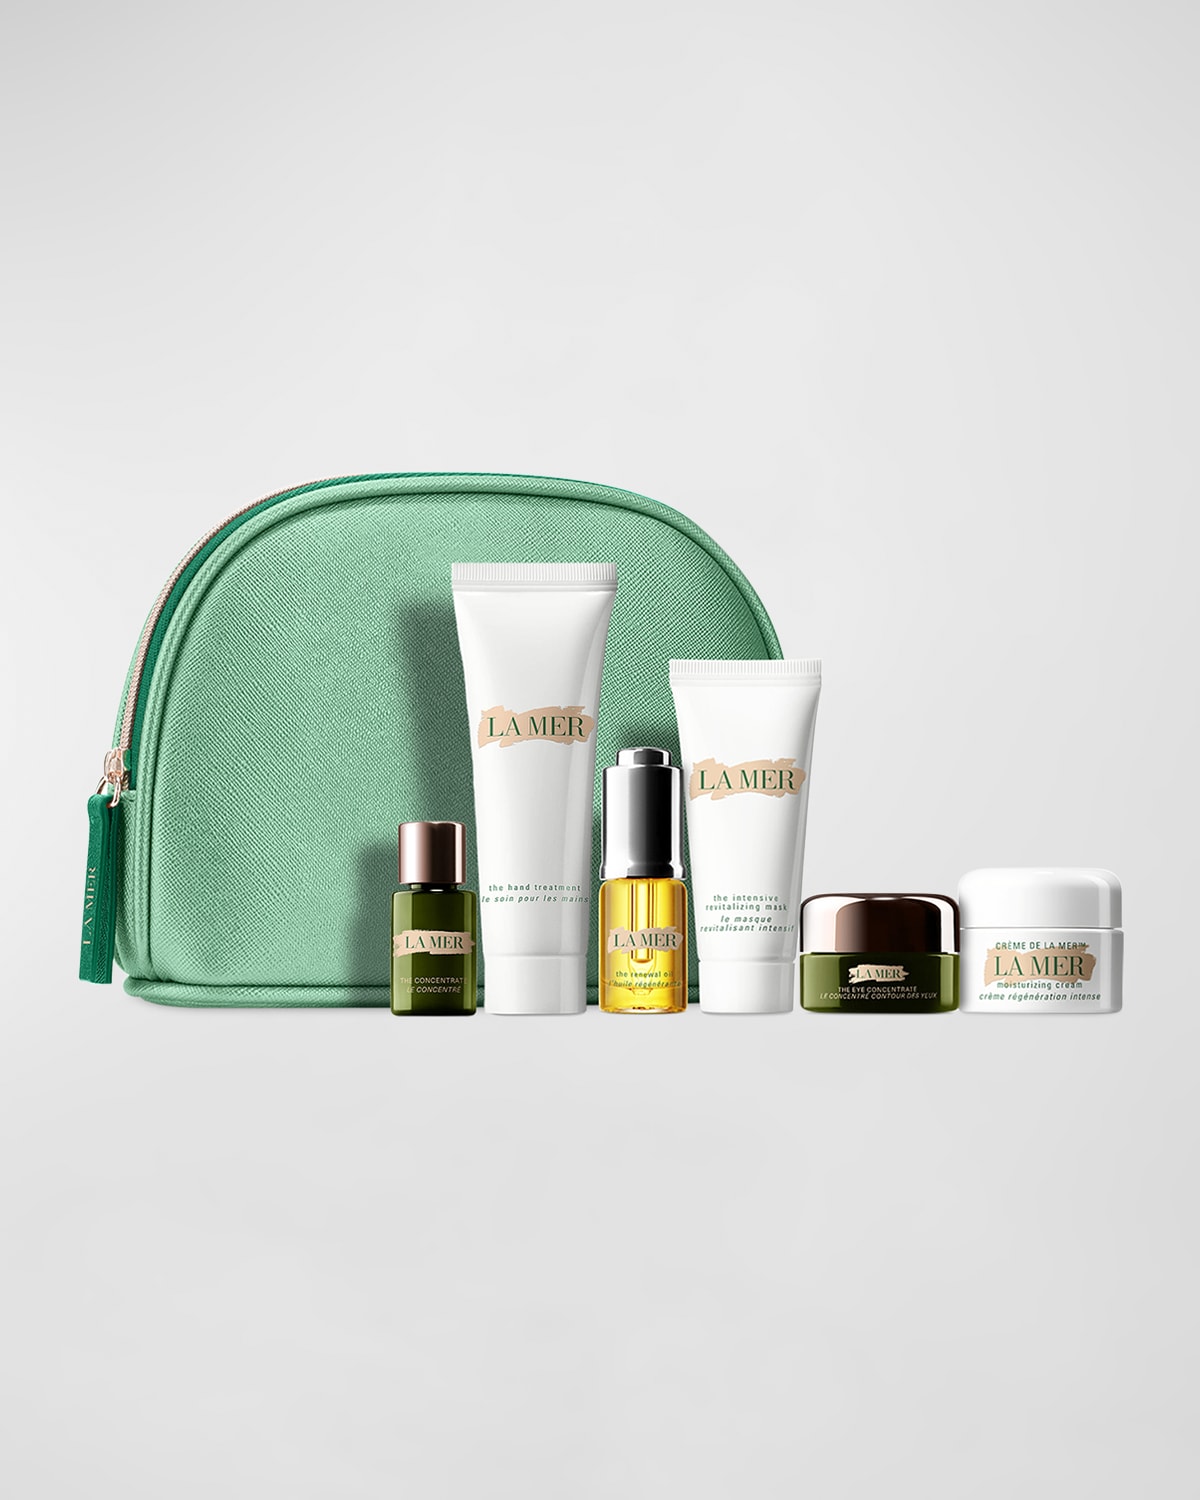 Neiman Marcus 6-Piece Gift Set, Yours with any $400 La Mer purchase